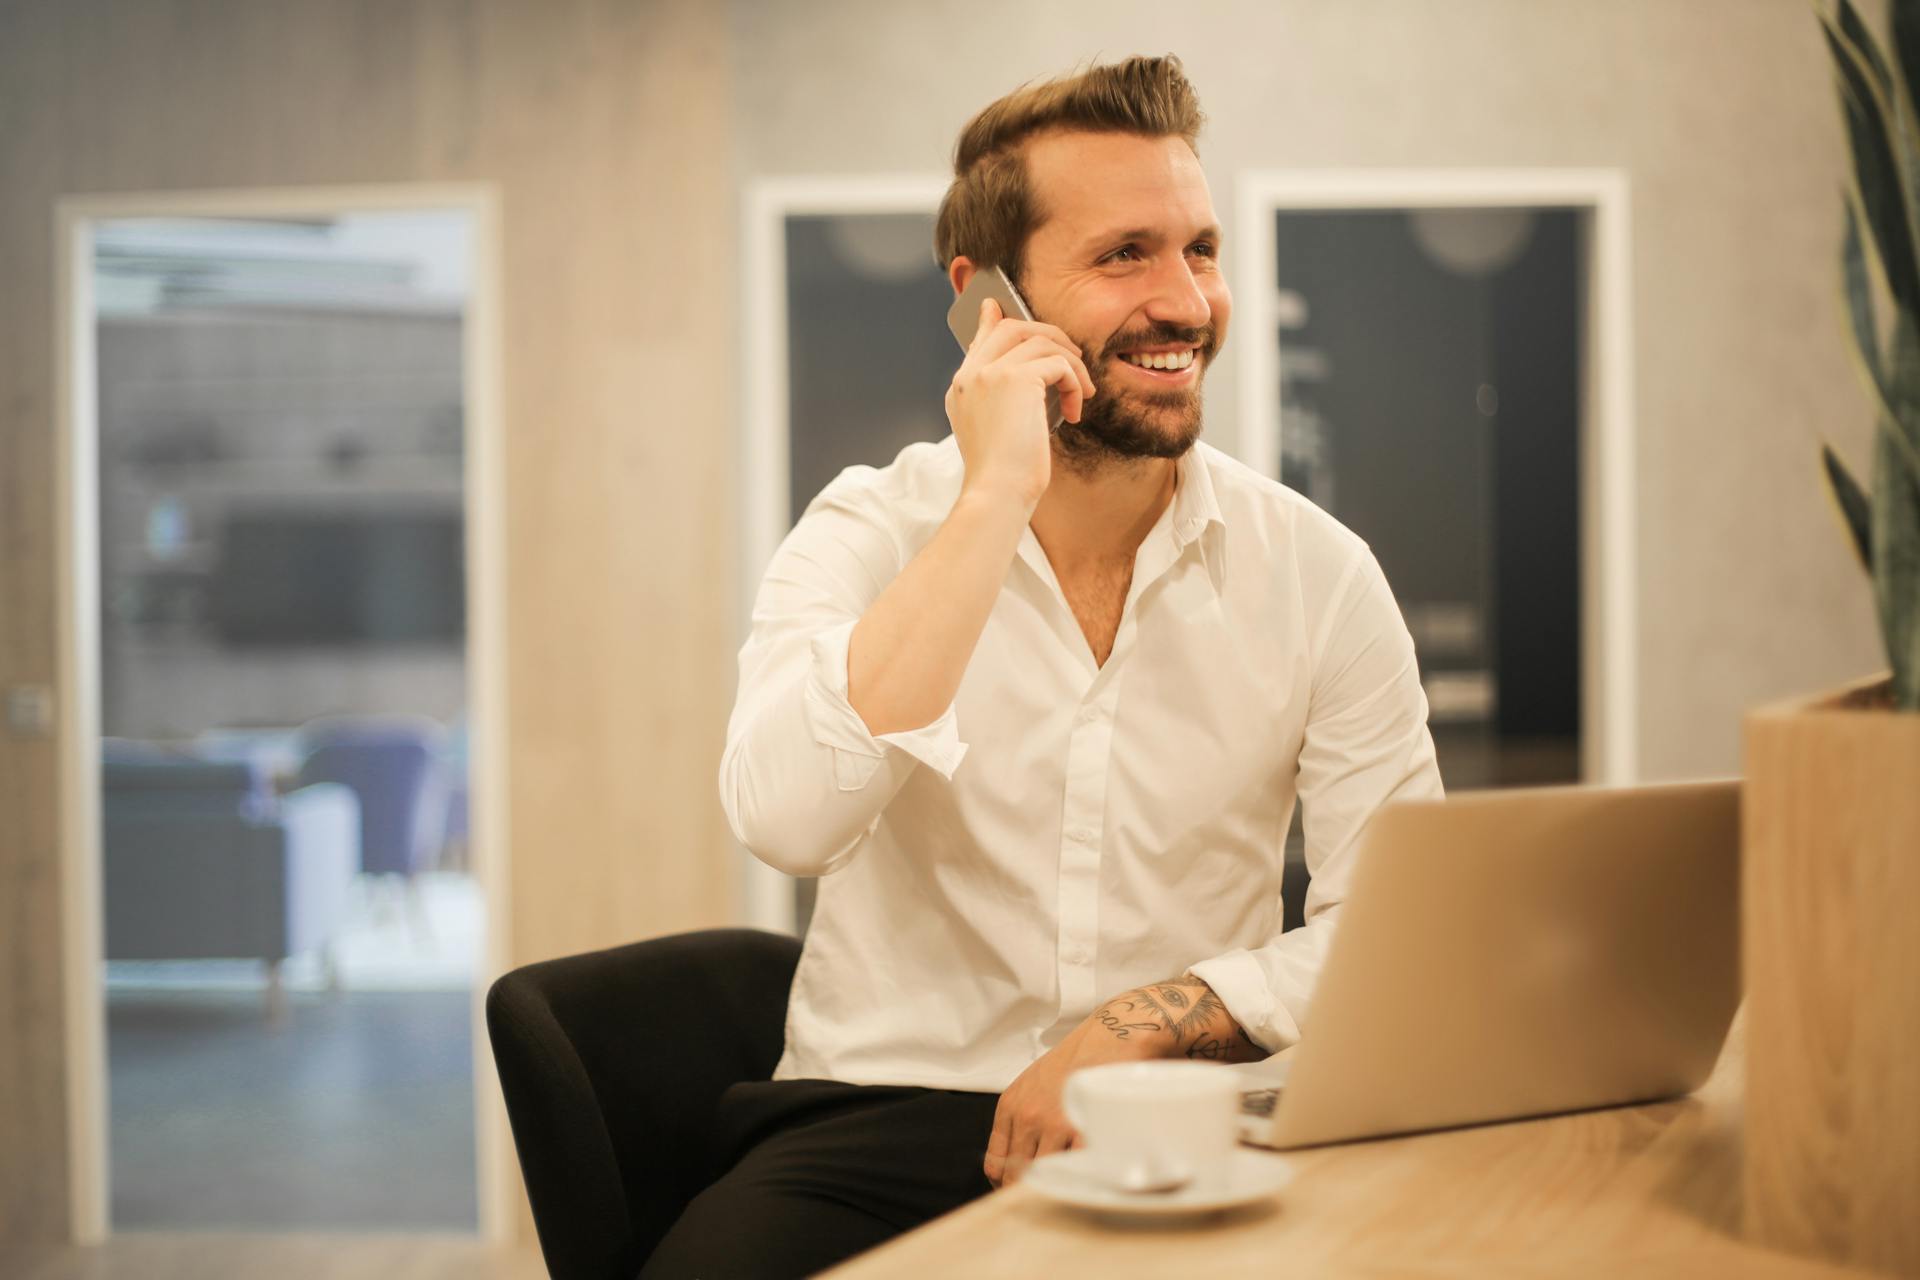 A man smiling on the phone | Source: Pexels